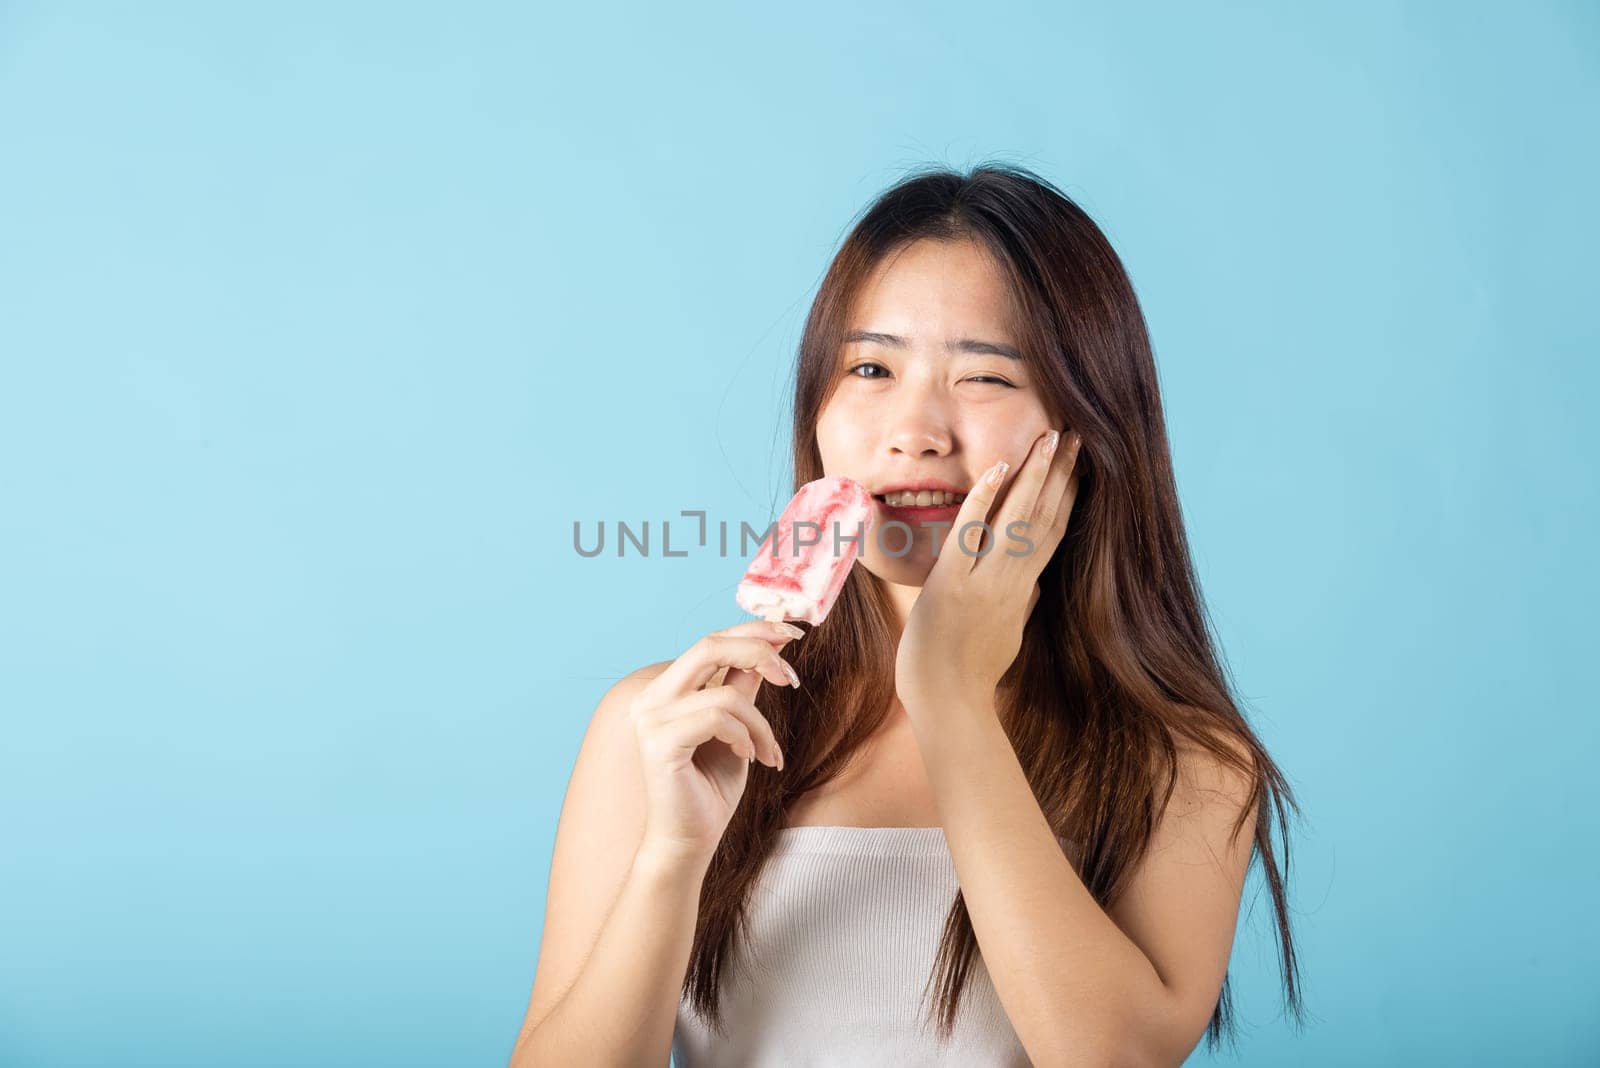 Portrait of Asian young woman with sensitive teeth after eating delicious ice cream wood stick mixed fruit flavor feeling painful uncomfortable, studio shot isolated on blue background, dental problem